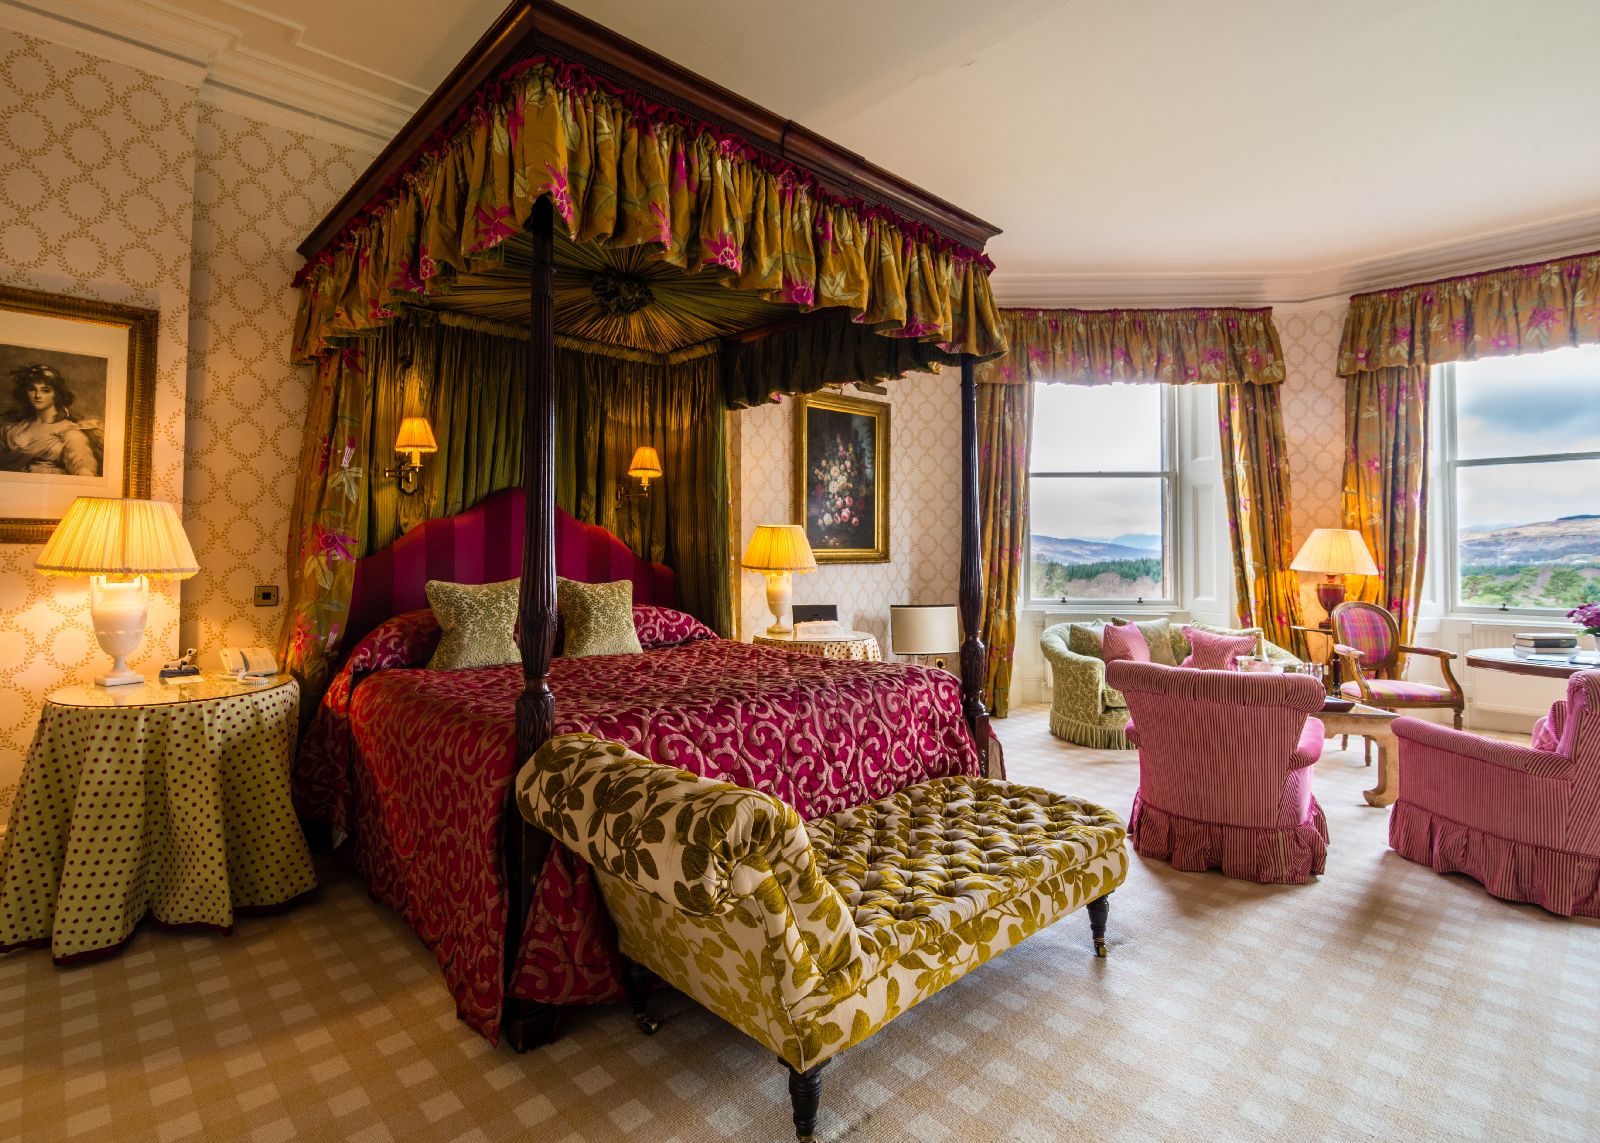 Spacious room with four poster bed at the Inverlochy Castle Hotel in Scotland